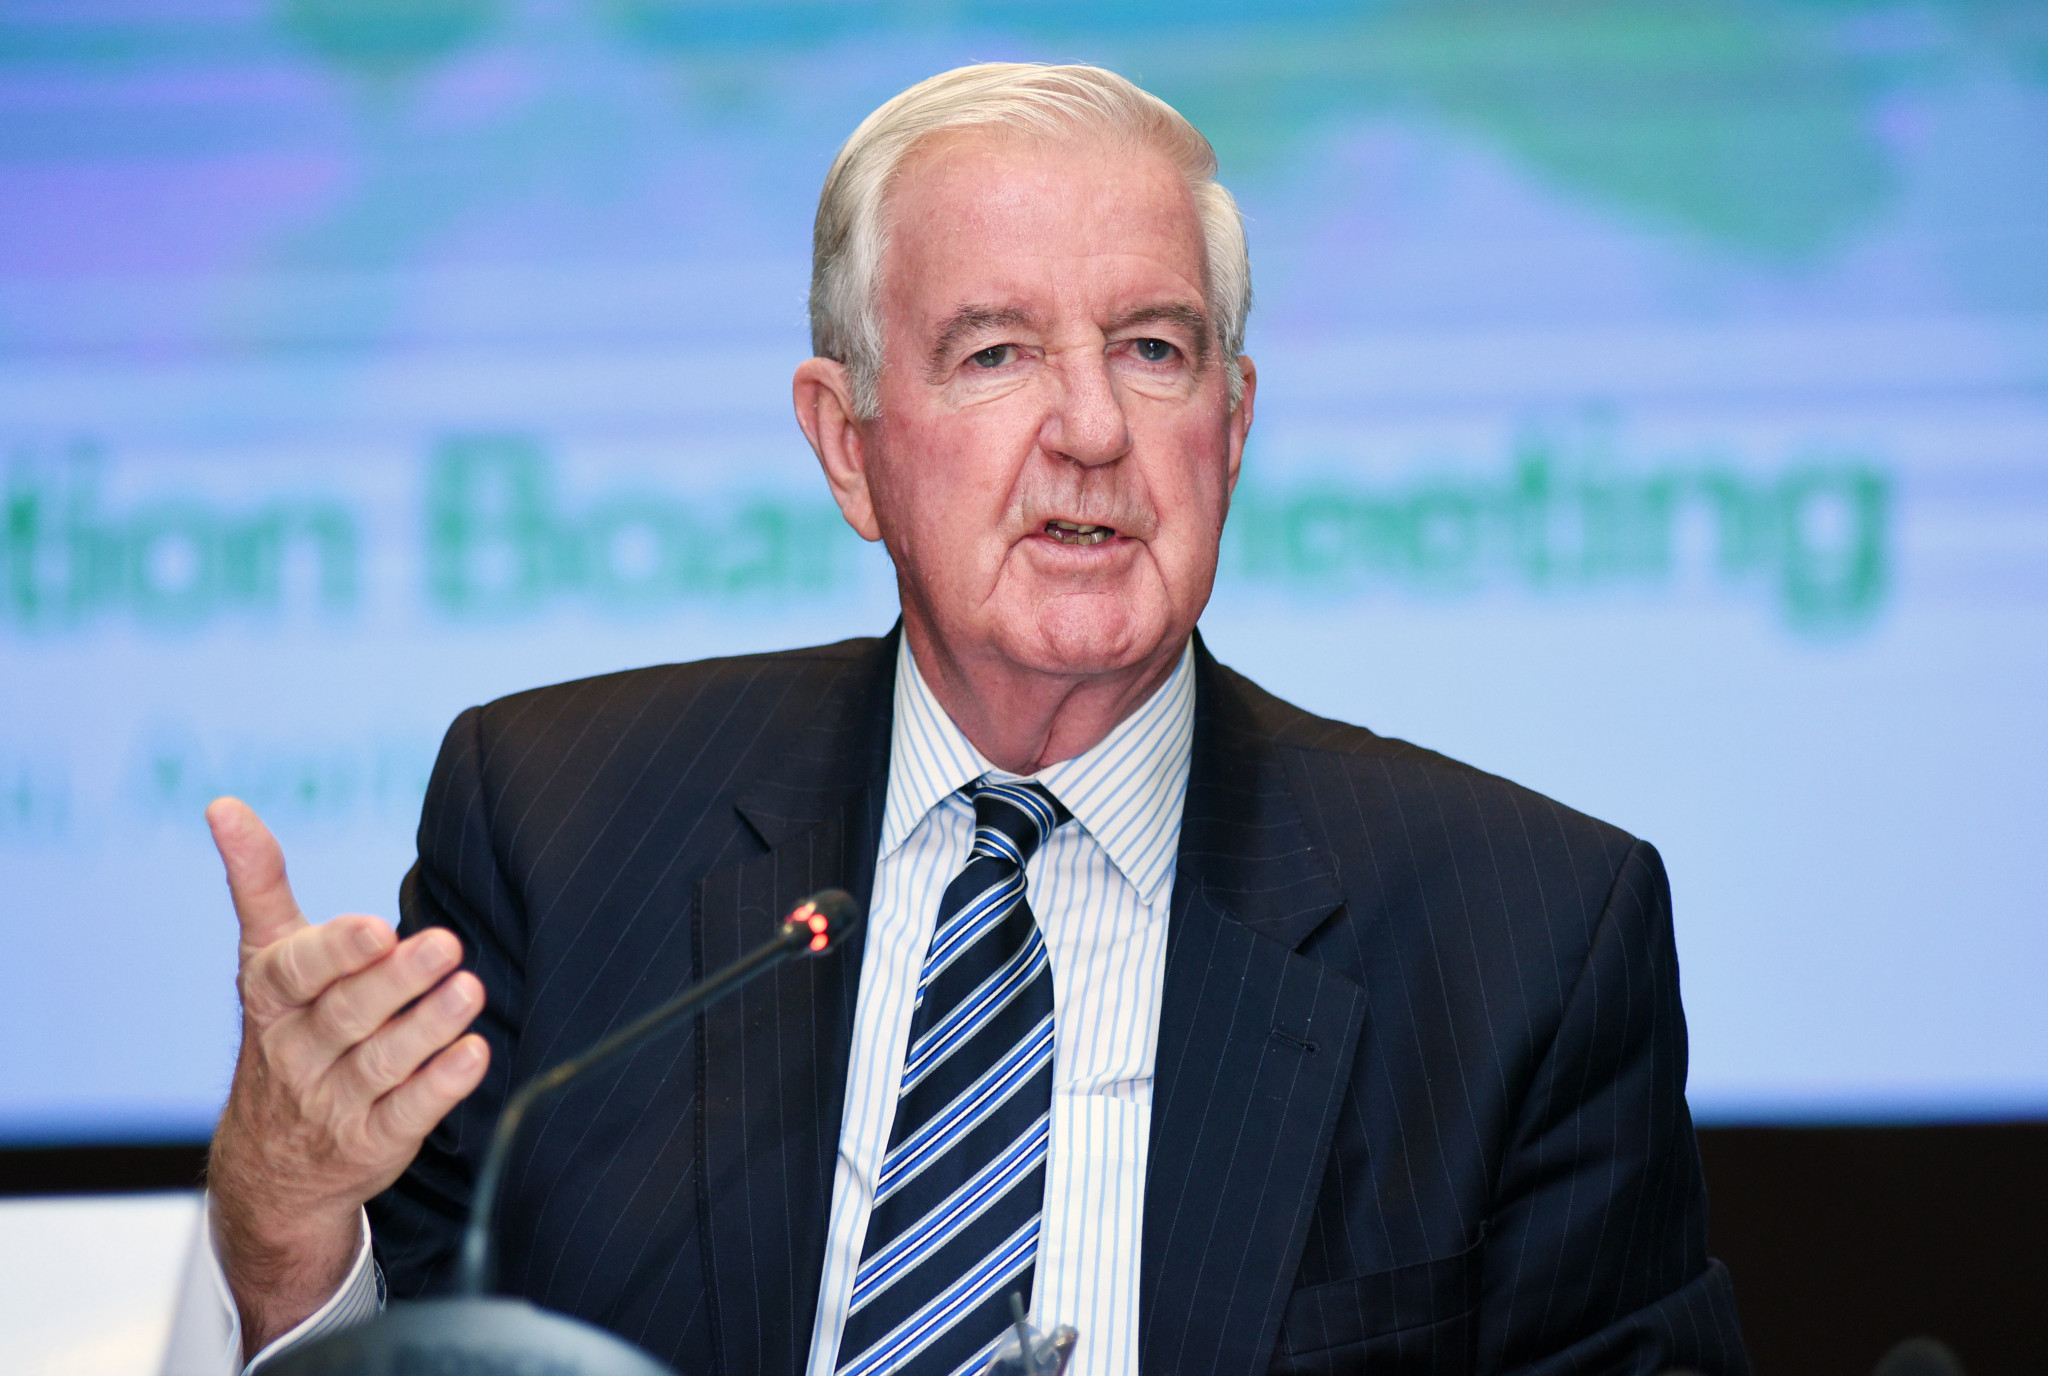 WADA and its President Sir Craig Reedie were criticised for the way the organisation handled the Russian scandal ©Getty Images